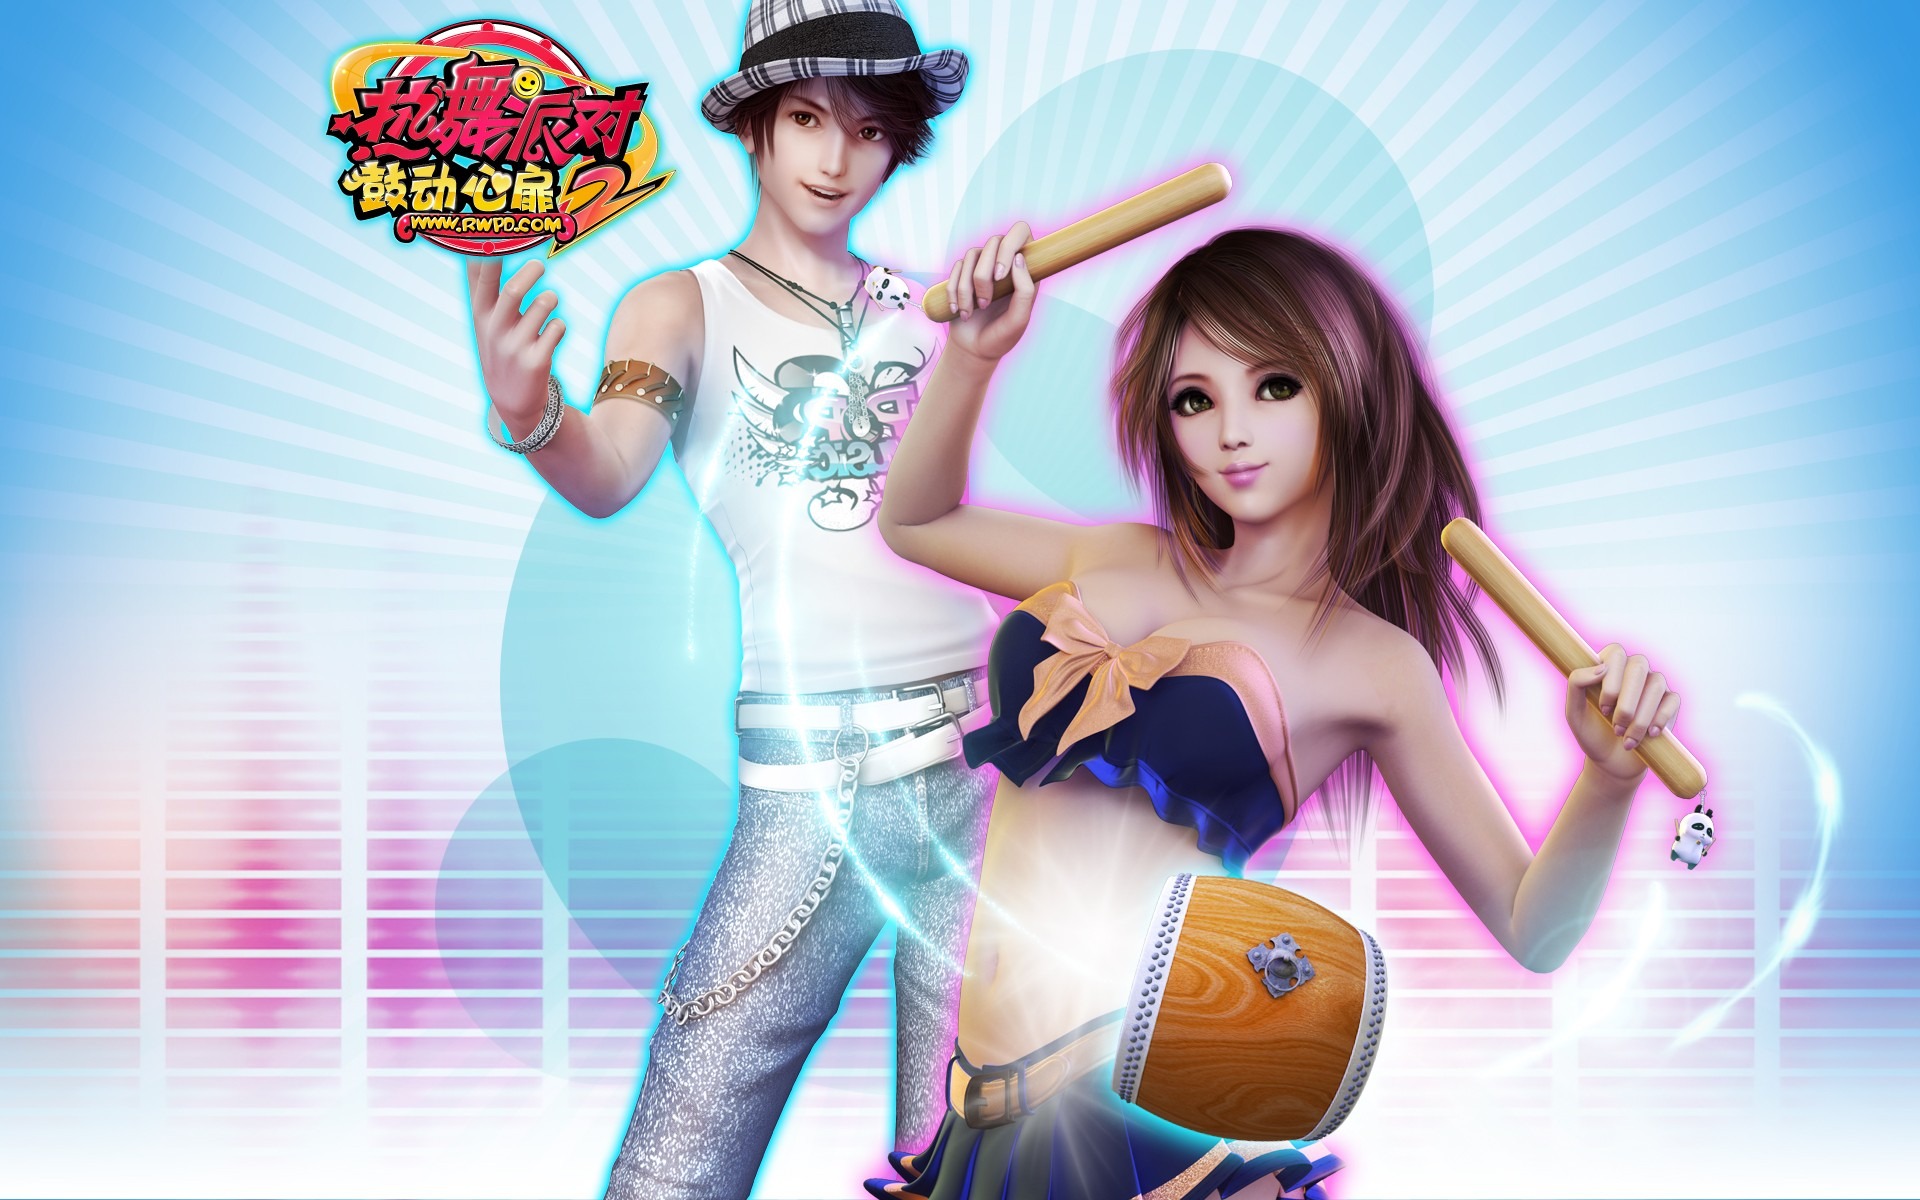 Online game Hot Dance Party II official wallpapers #14 - 1920x1200